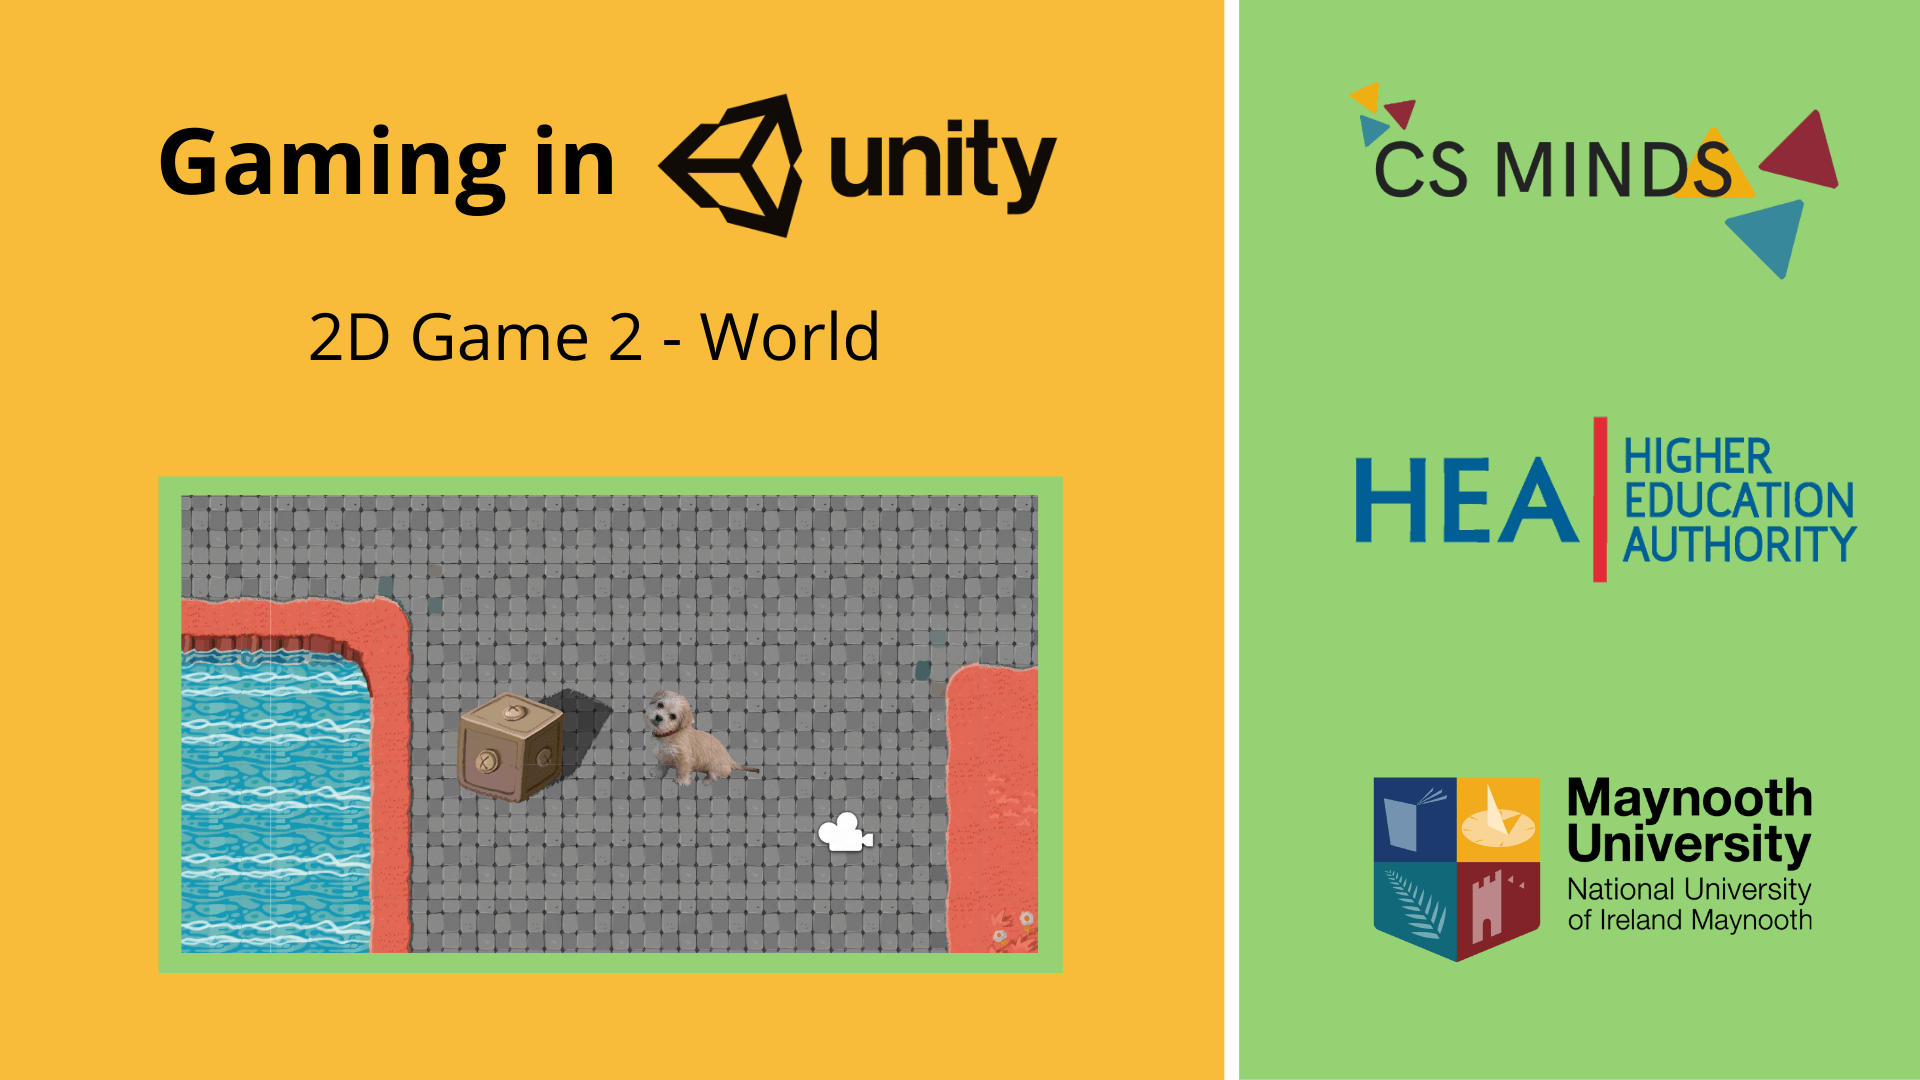 (../img/unity-6-2d-game-2-world/2d-game-2-world-header.png)